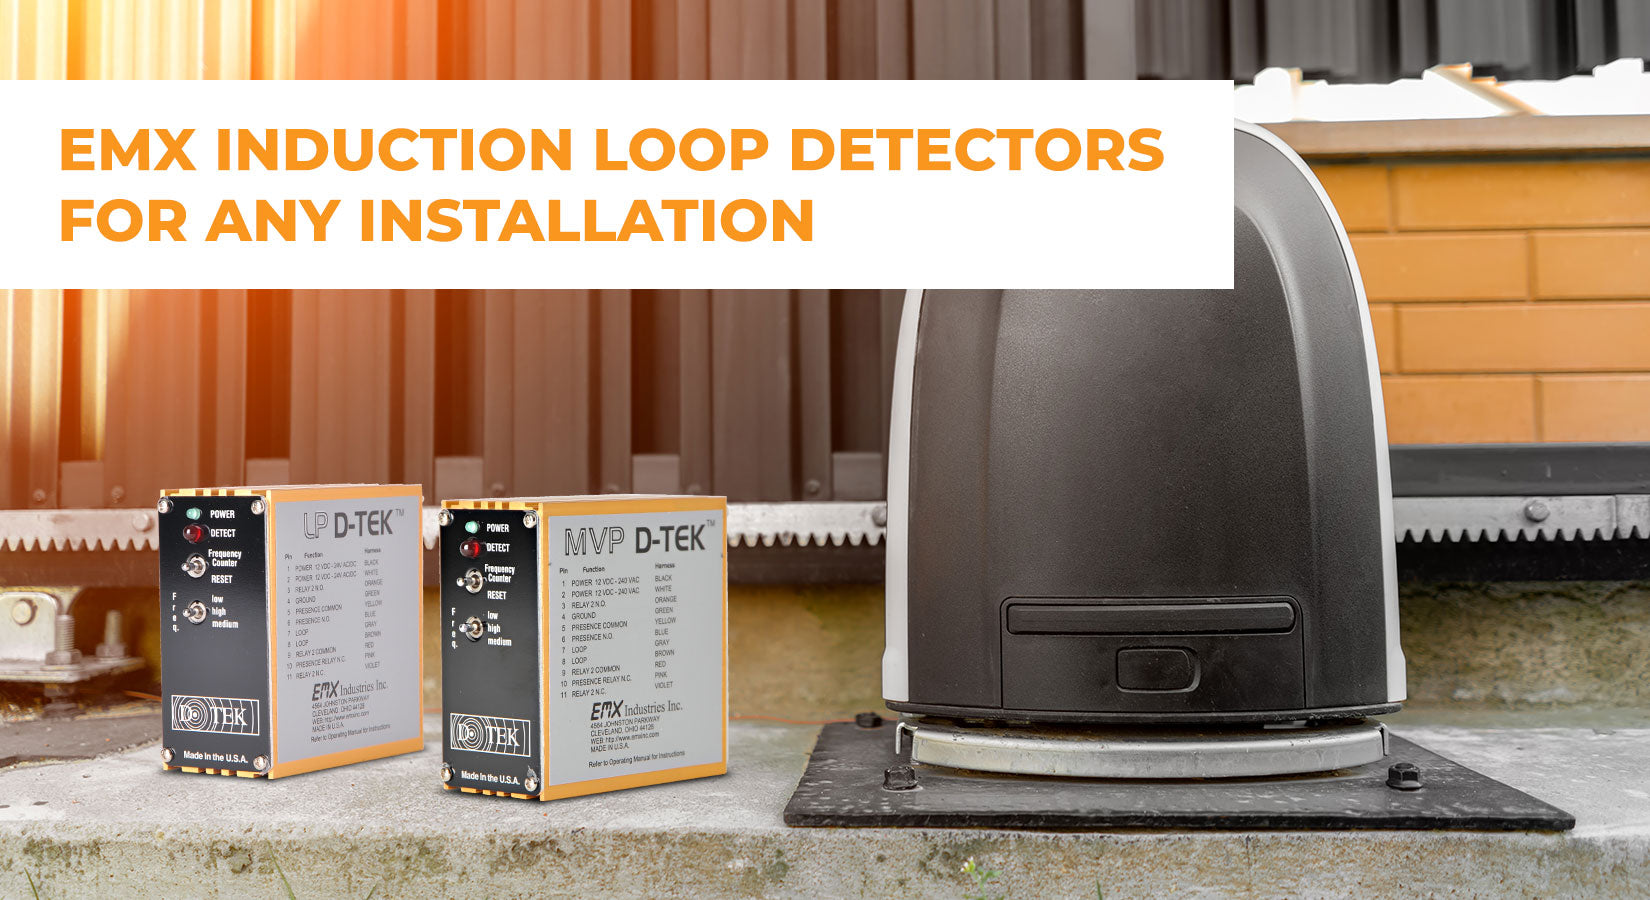 EMX Induction Loop Detectors For Any Installation | All Security Equipment